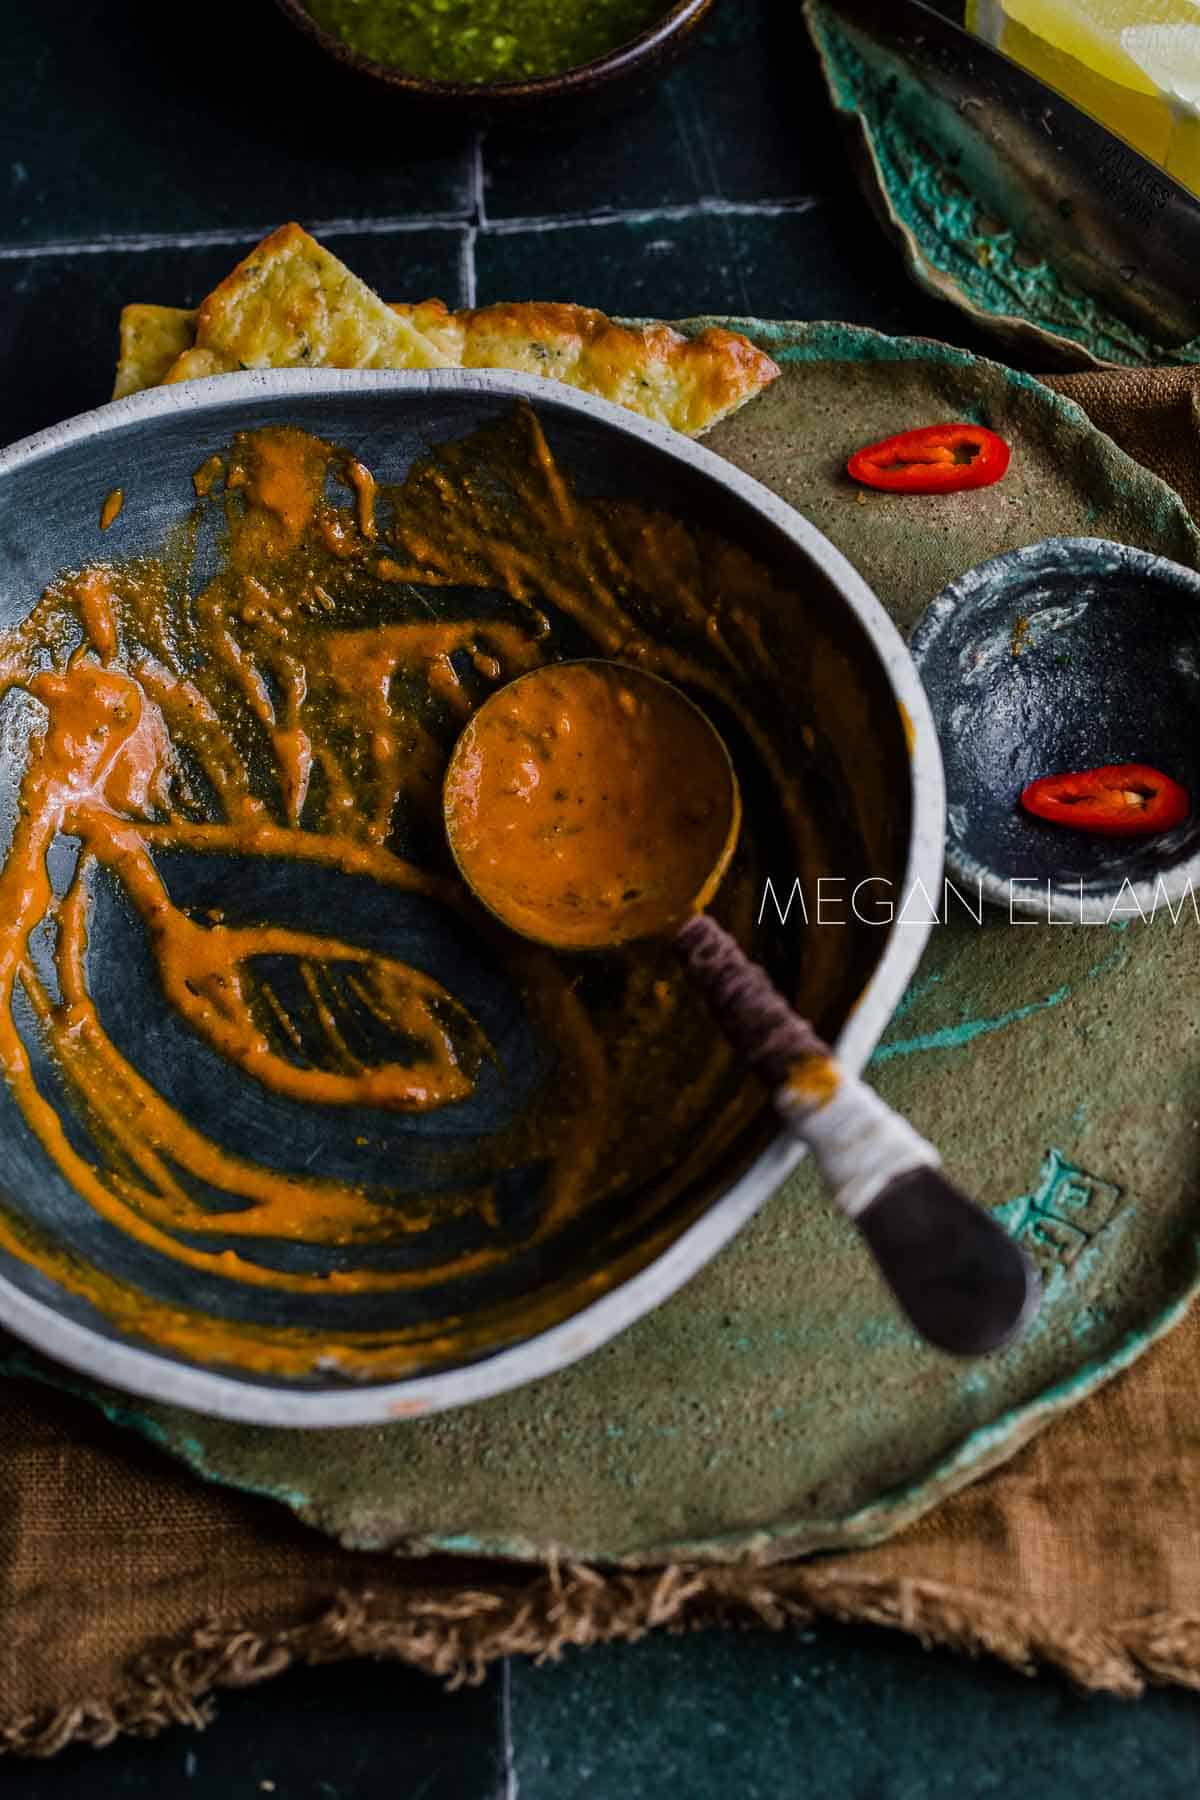 An empty green bowl with masala sauce in the bottom.